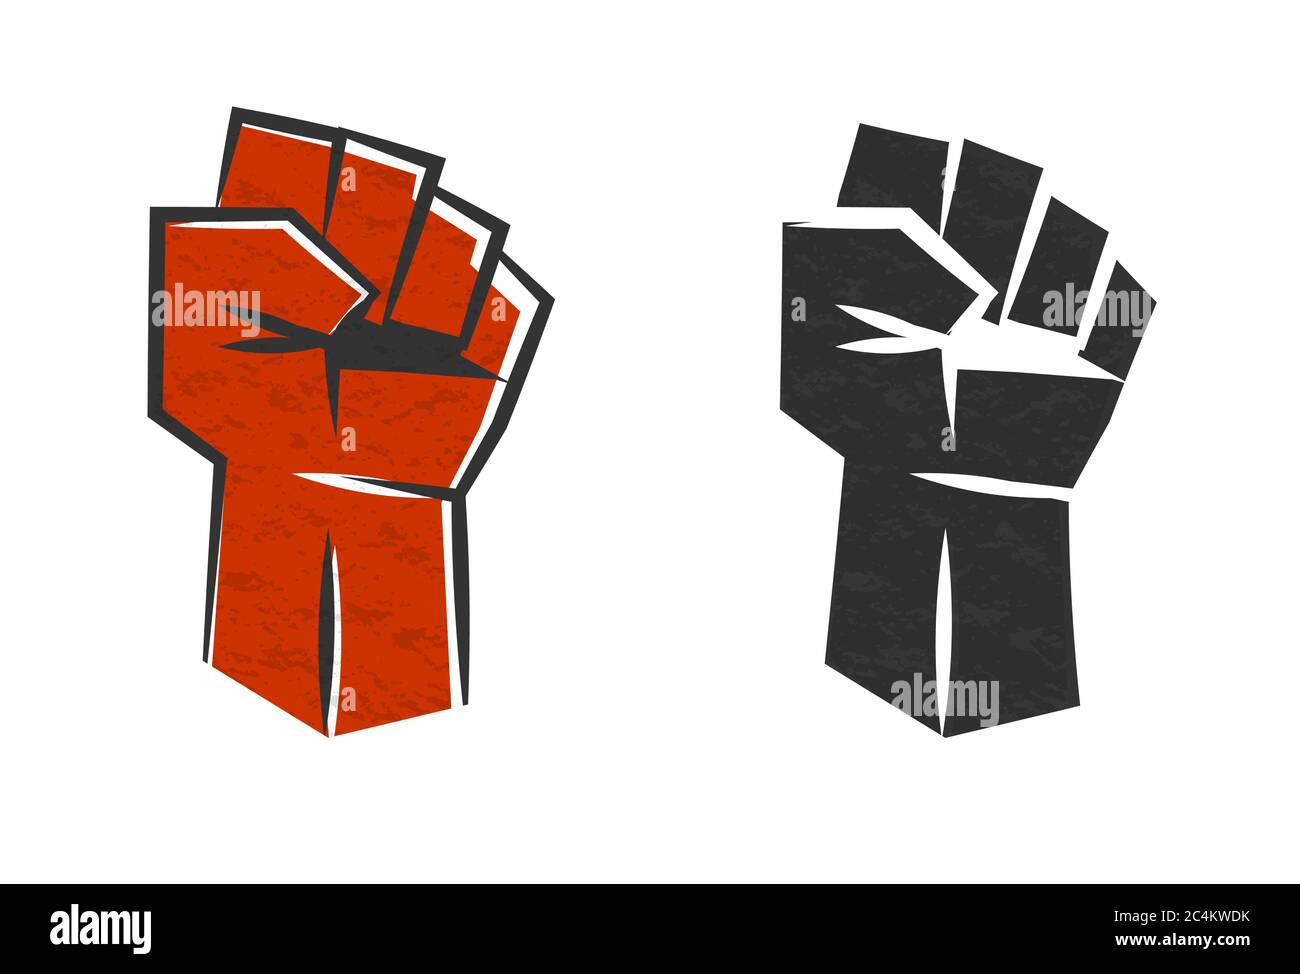 Red clenched fist symbol of revolution vector Stock Vector